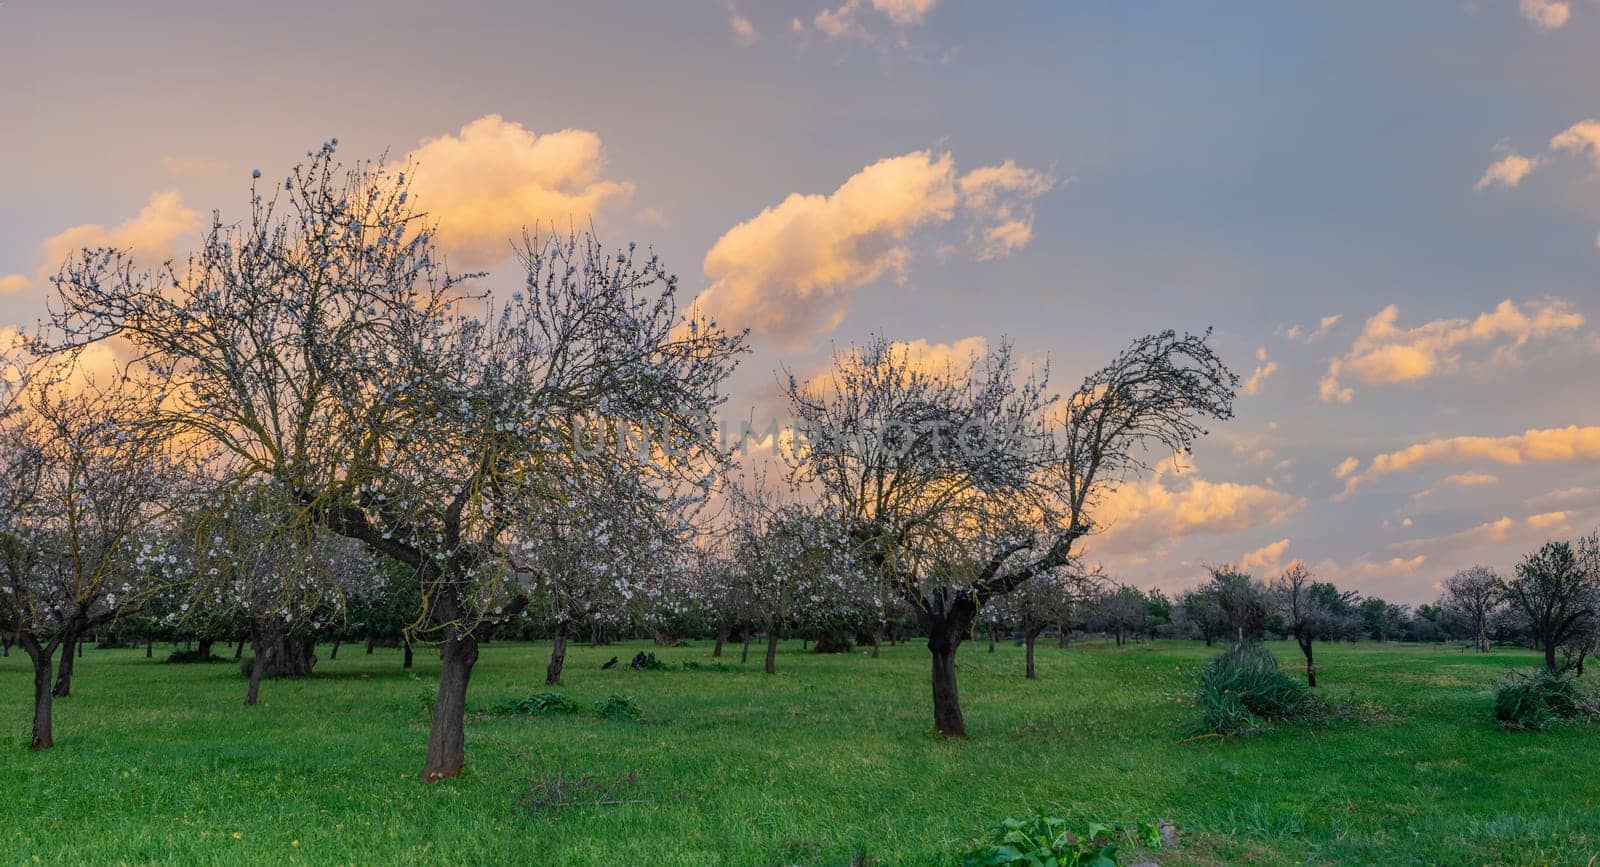 As the sun sets, a serene orchard comes to life with the soft glow of twilight. Blossoming trees stand proudly in the lush grass, while a painted sky of orange and blue adds a tranquil backdrop.